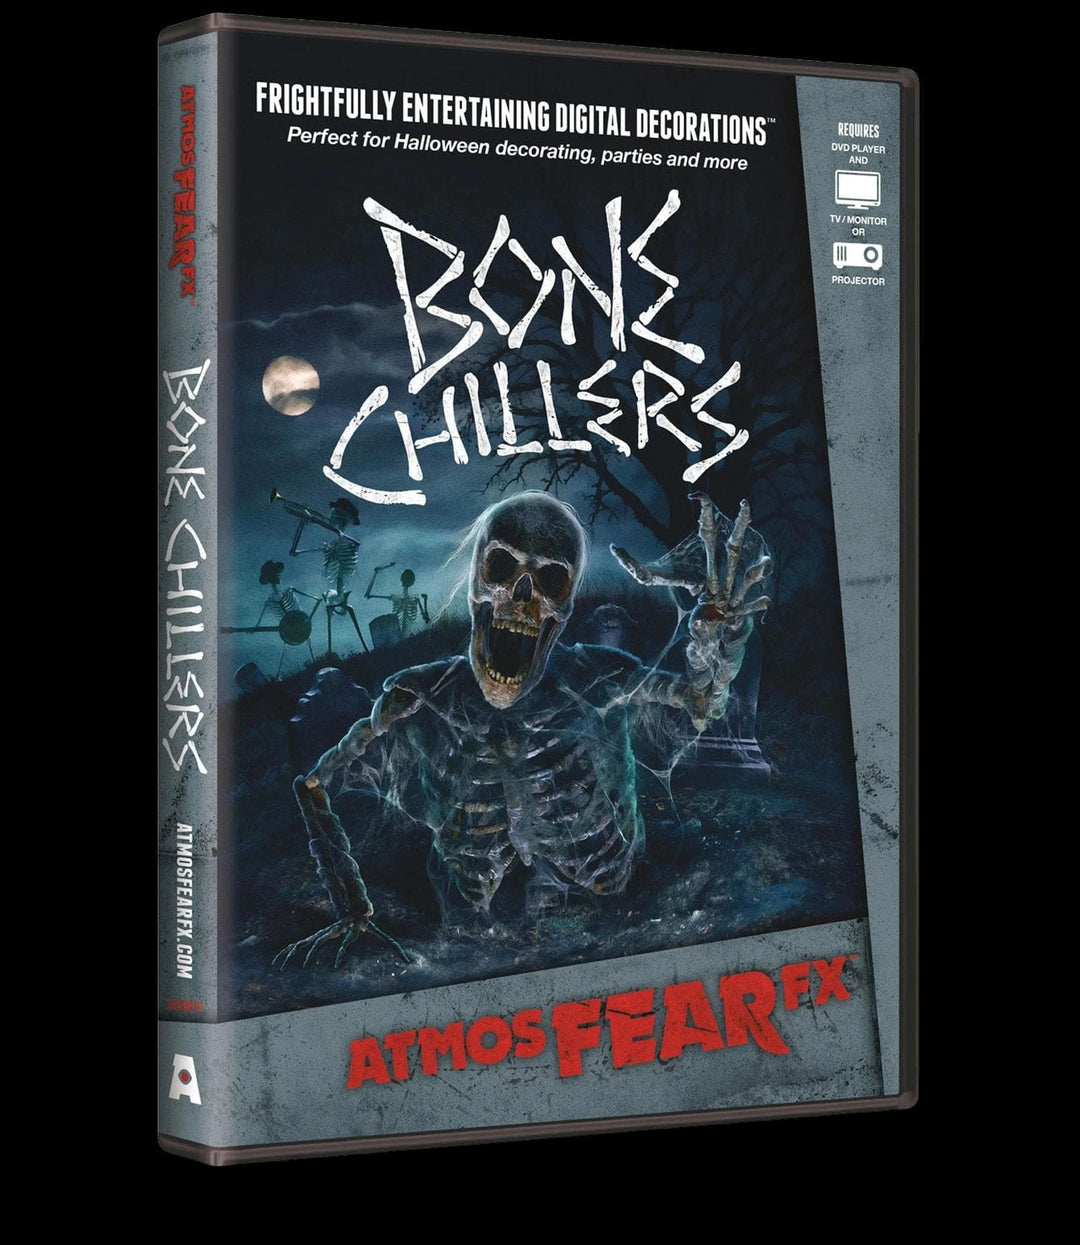 "Horror Effects DVD - Bone Chillers" Haunted House Effects